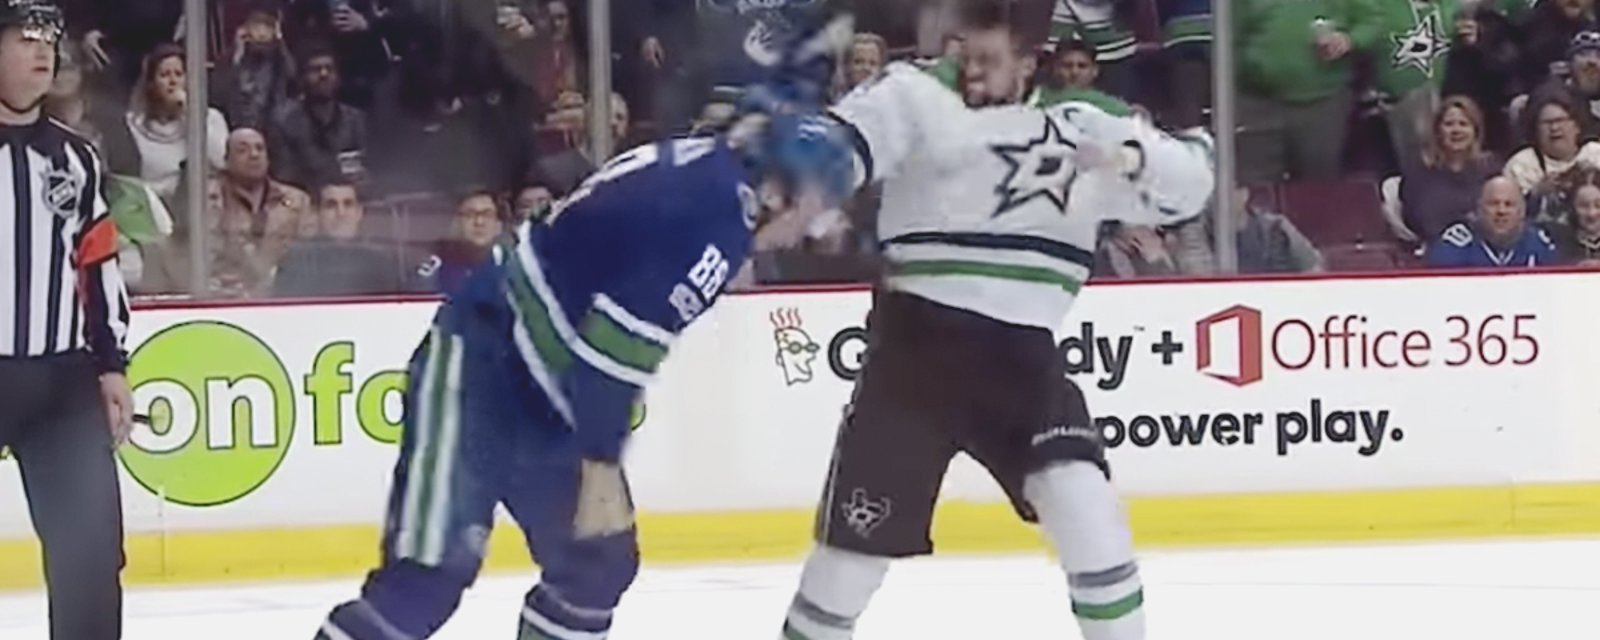 WATCH: NHL Superstar Jamie Benn Dropped the Mitts in one Heavy Weight Fight!